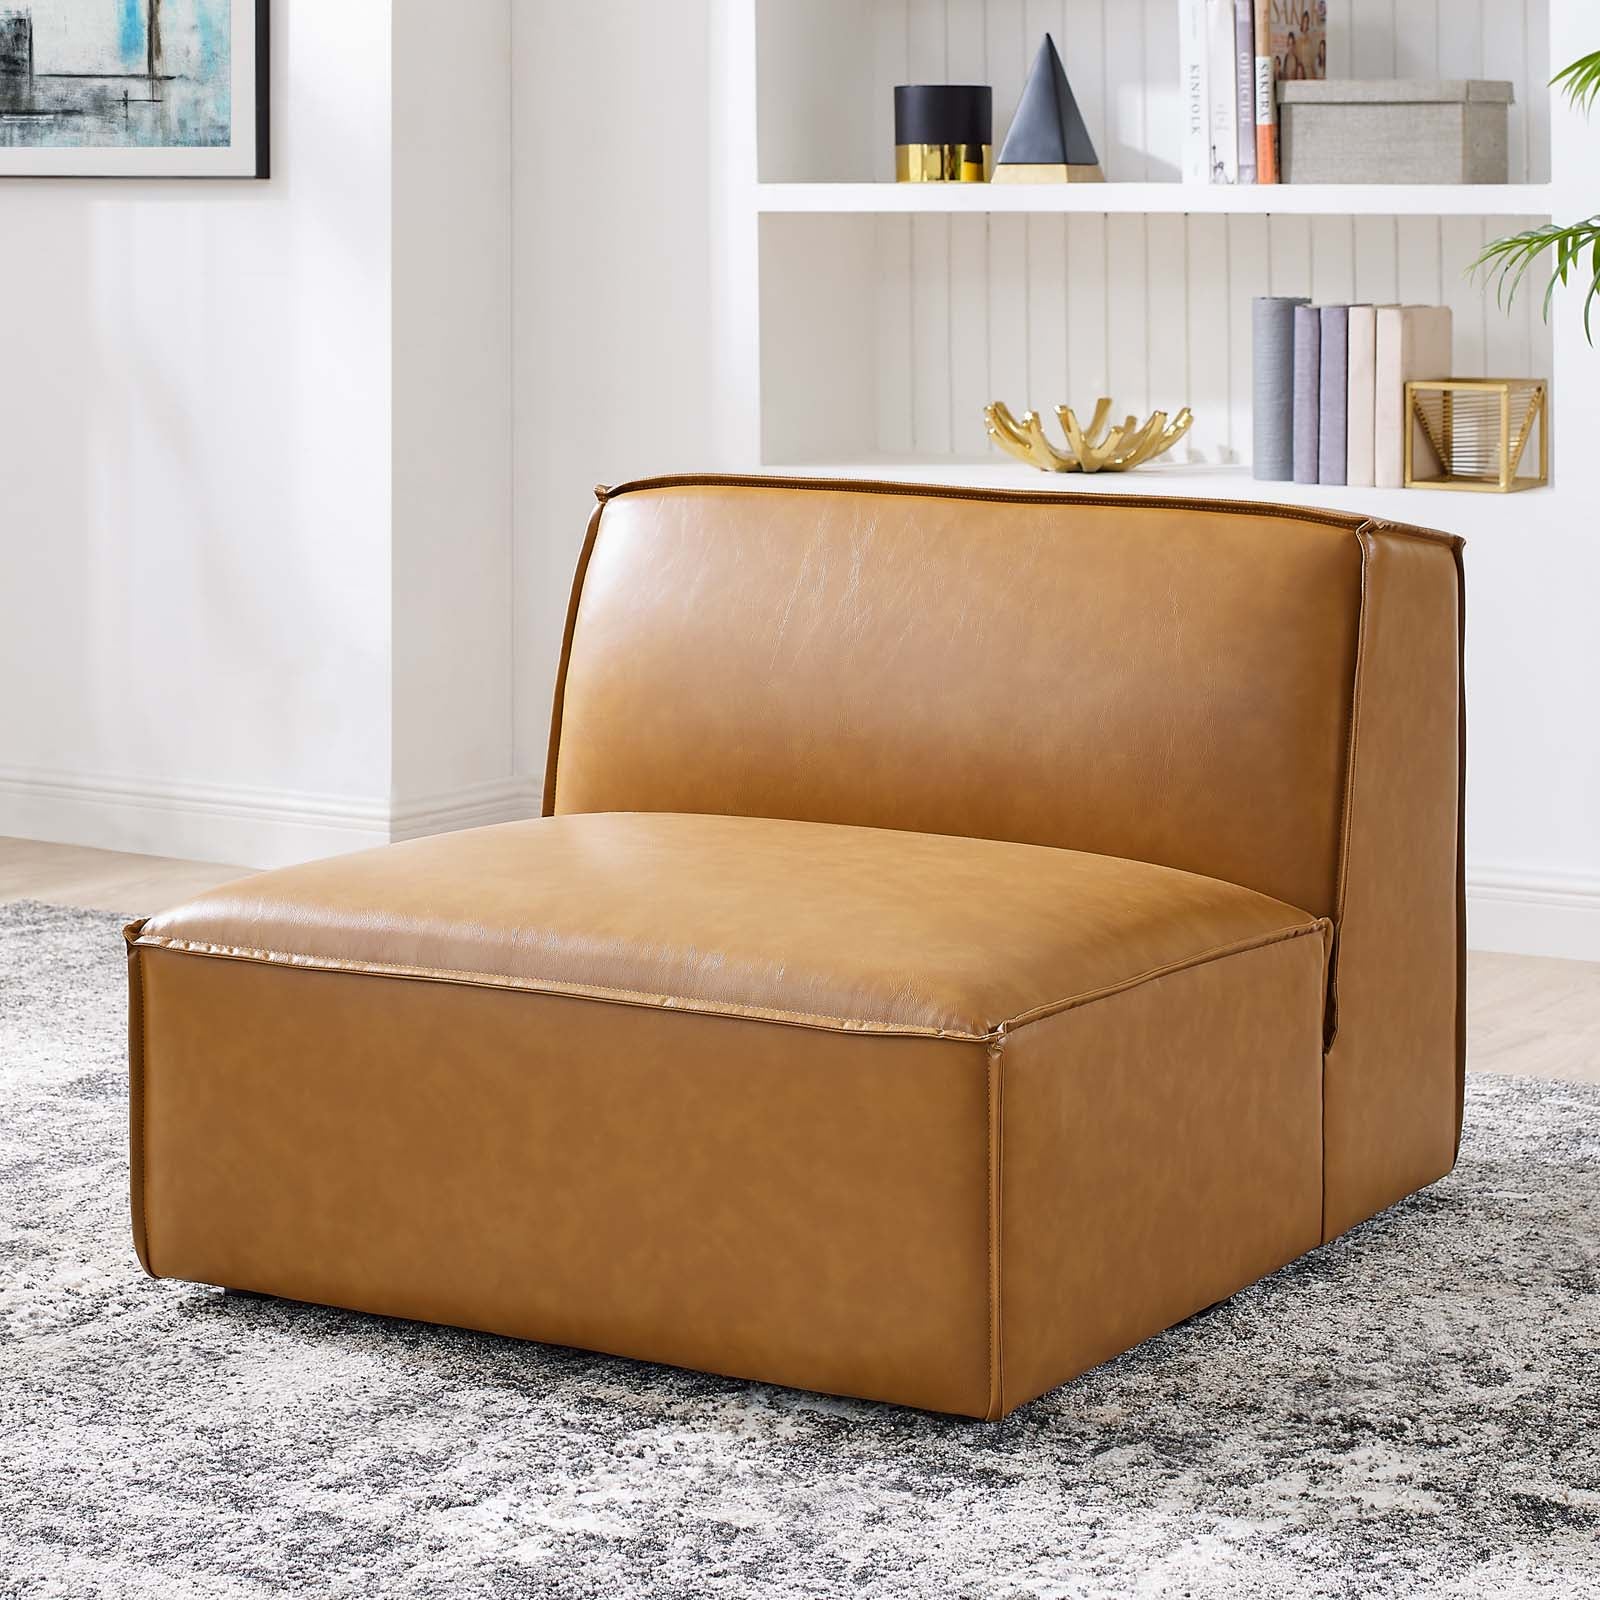 Modway Accent Chairs - Restore Vegan Leather Sectional Sofa Armless Chair Tan